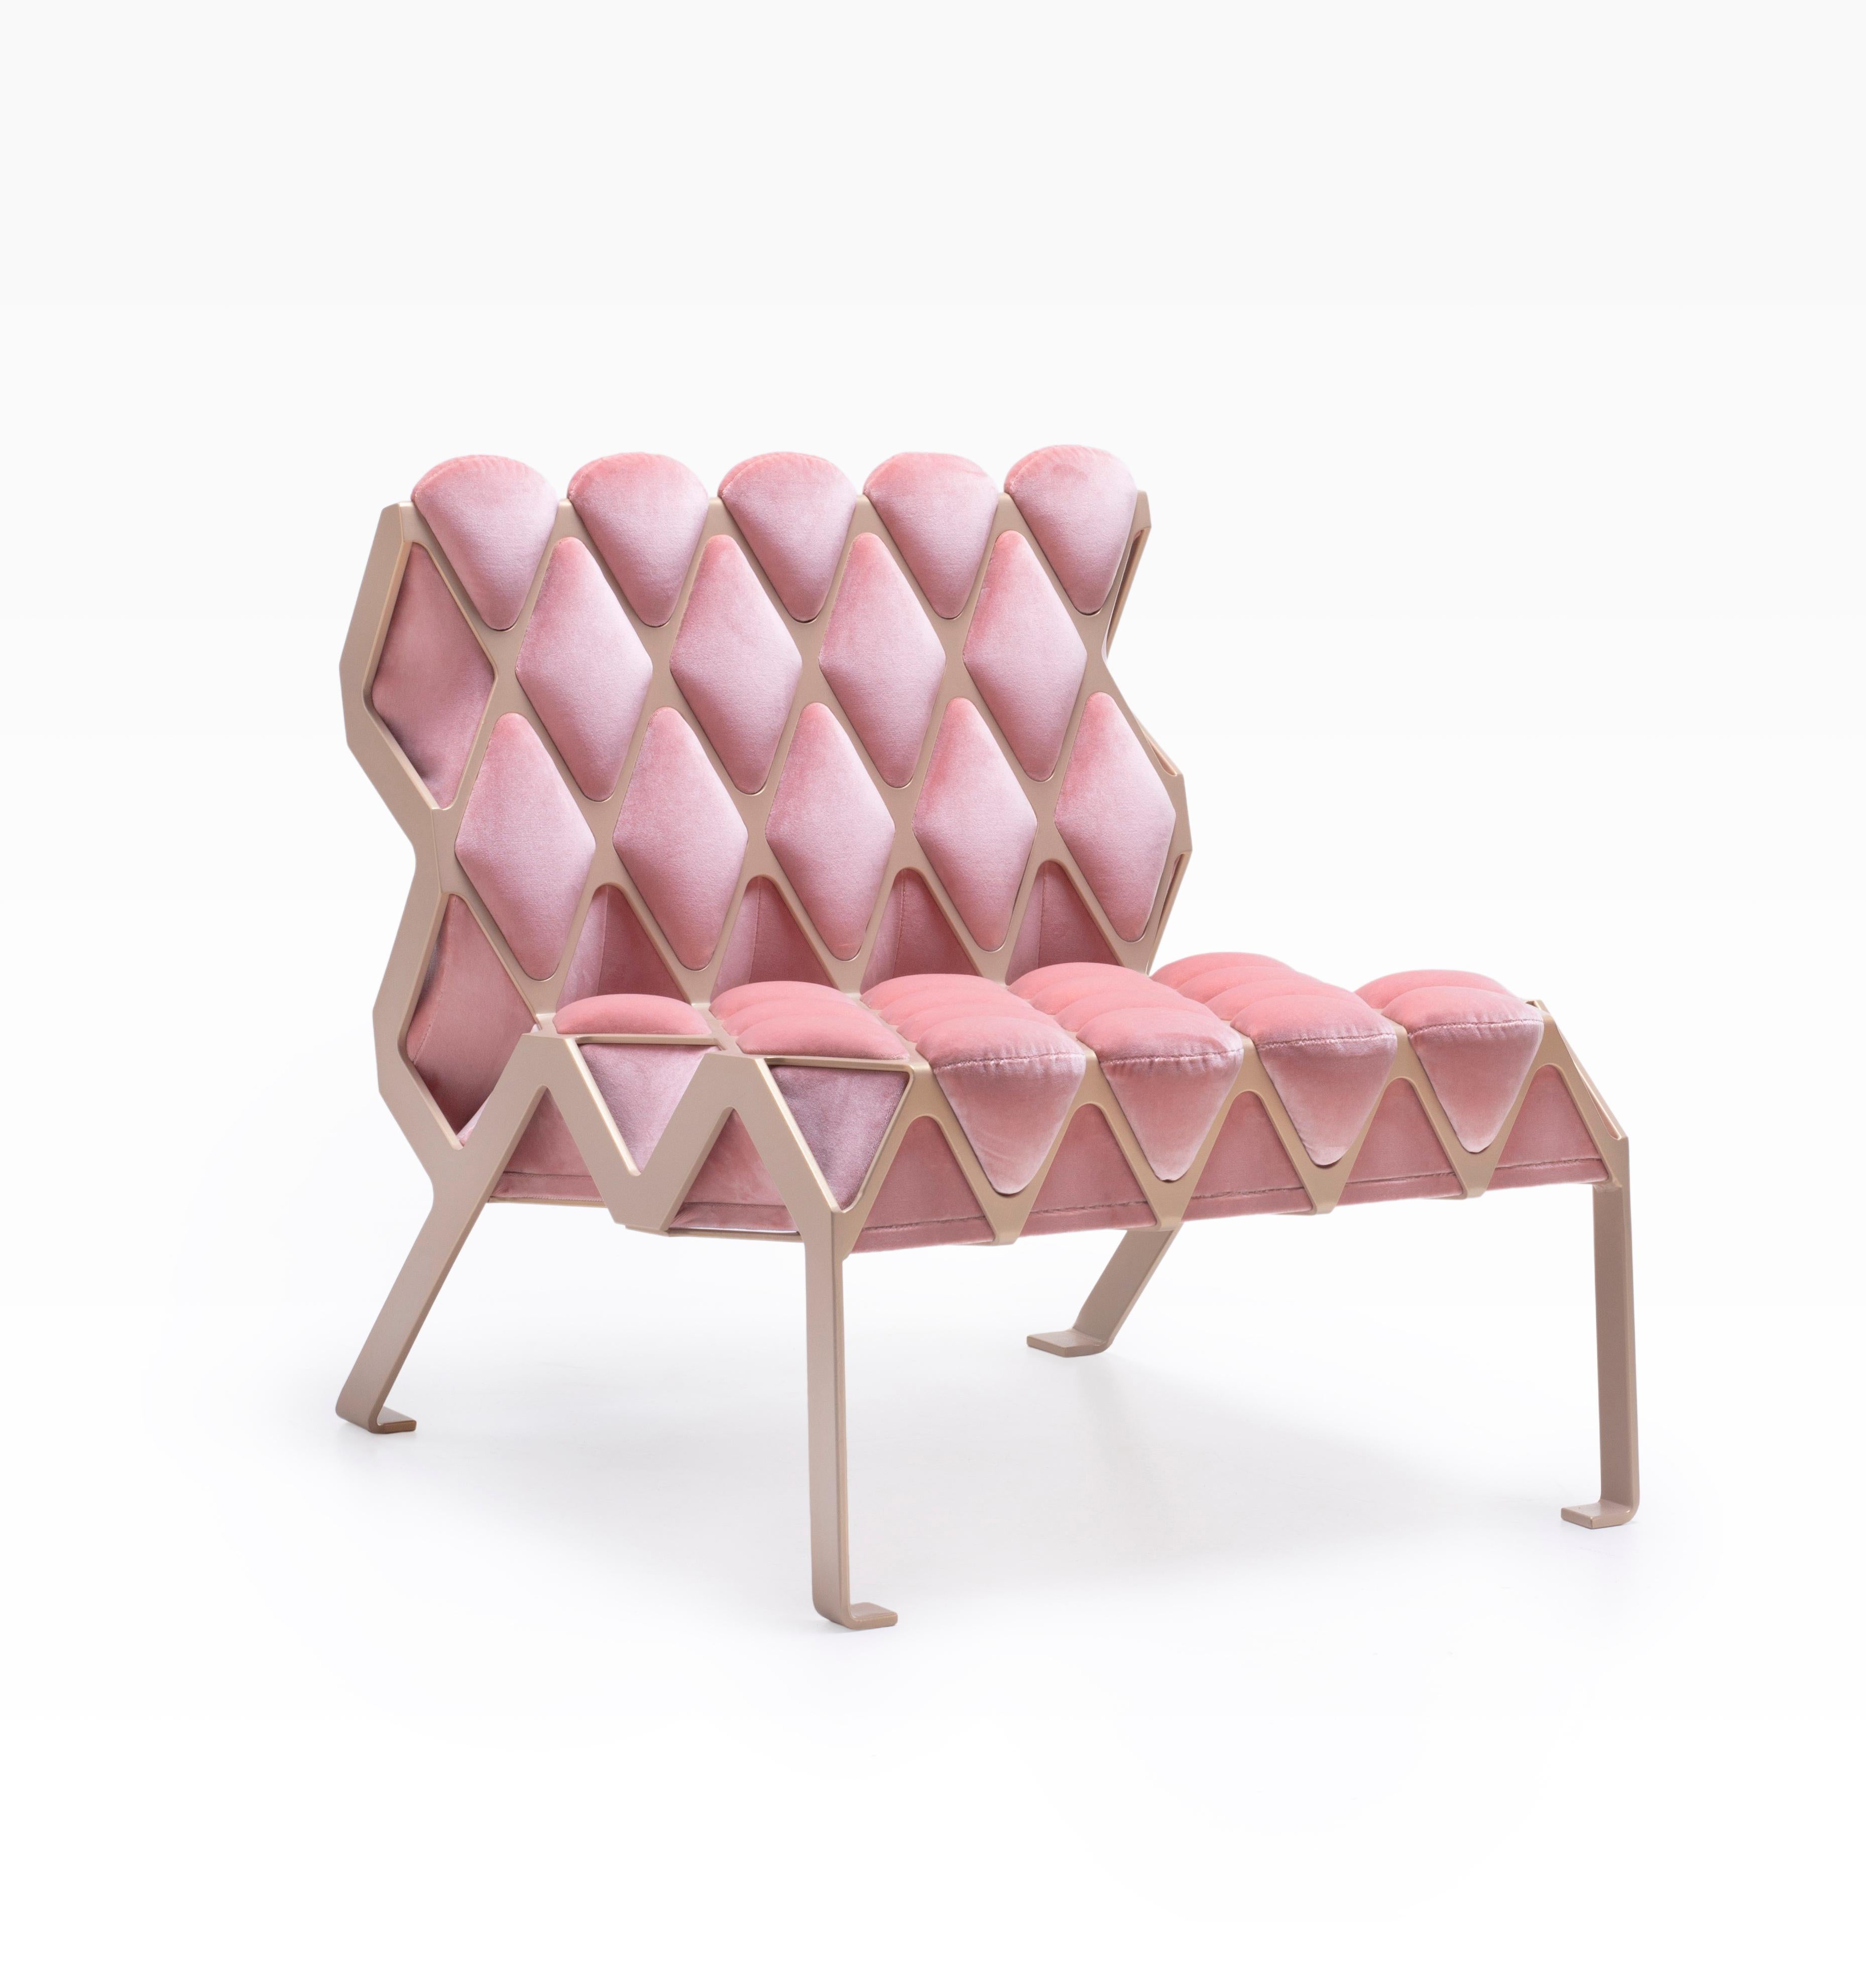 Marie Antoinette Matrice side chair is a side chair designed around the imprint. The imprint created by the interaction between two materials, a ductile and a soft one. Inspiration from Gabriele Basilico's chair print photography’s

Matrice side